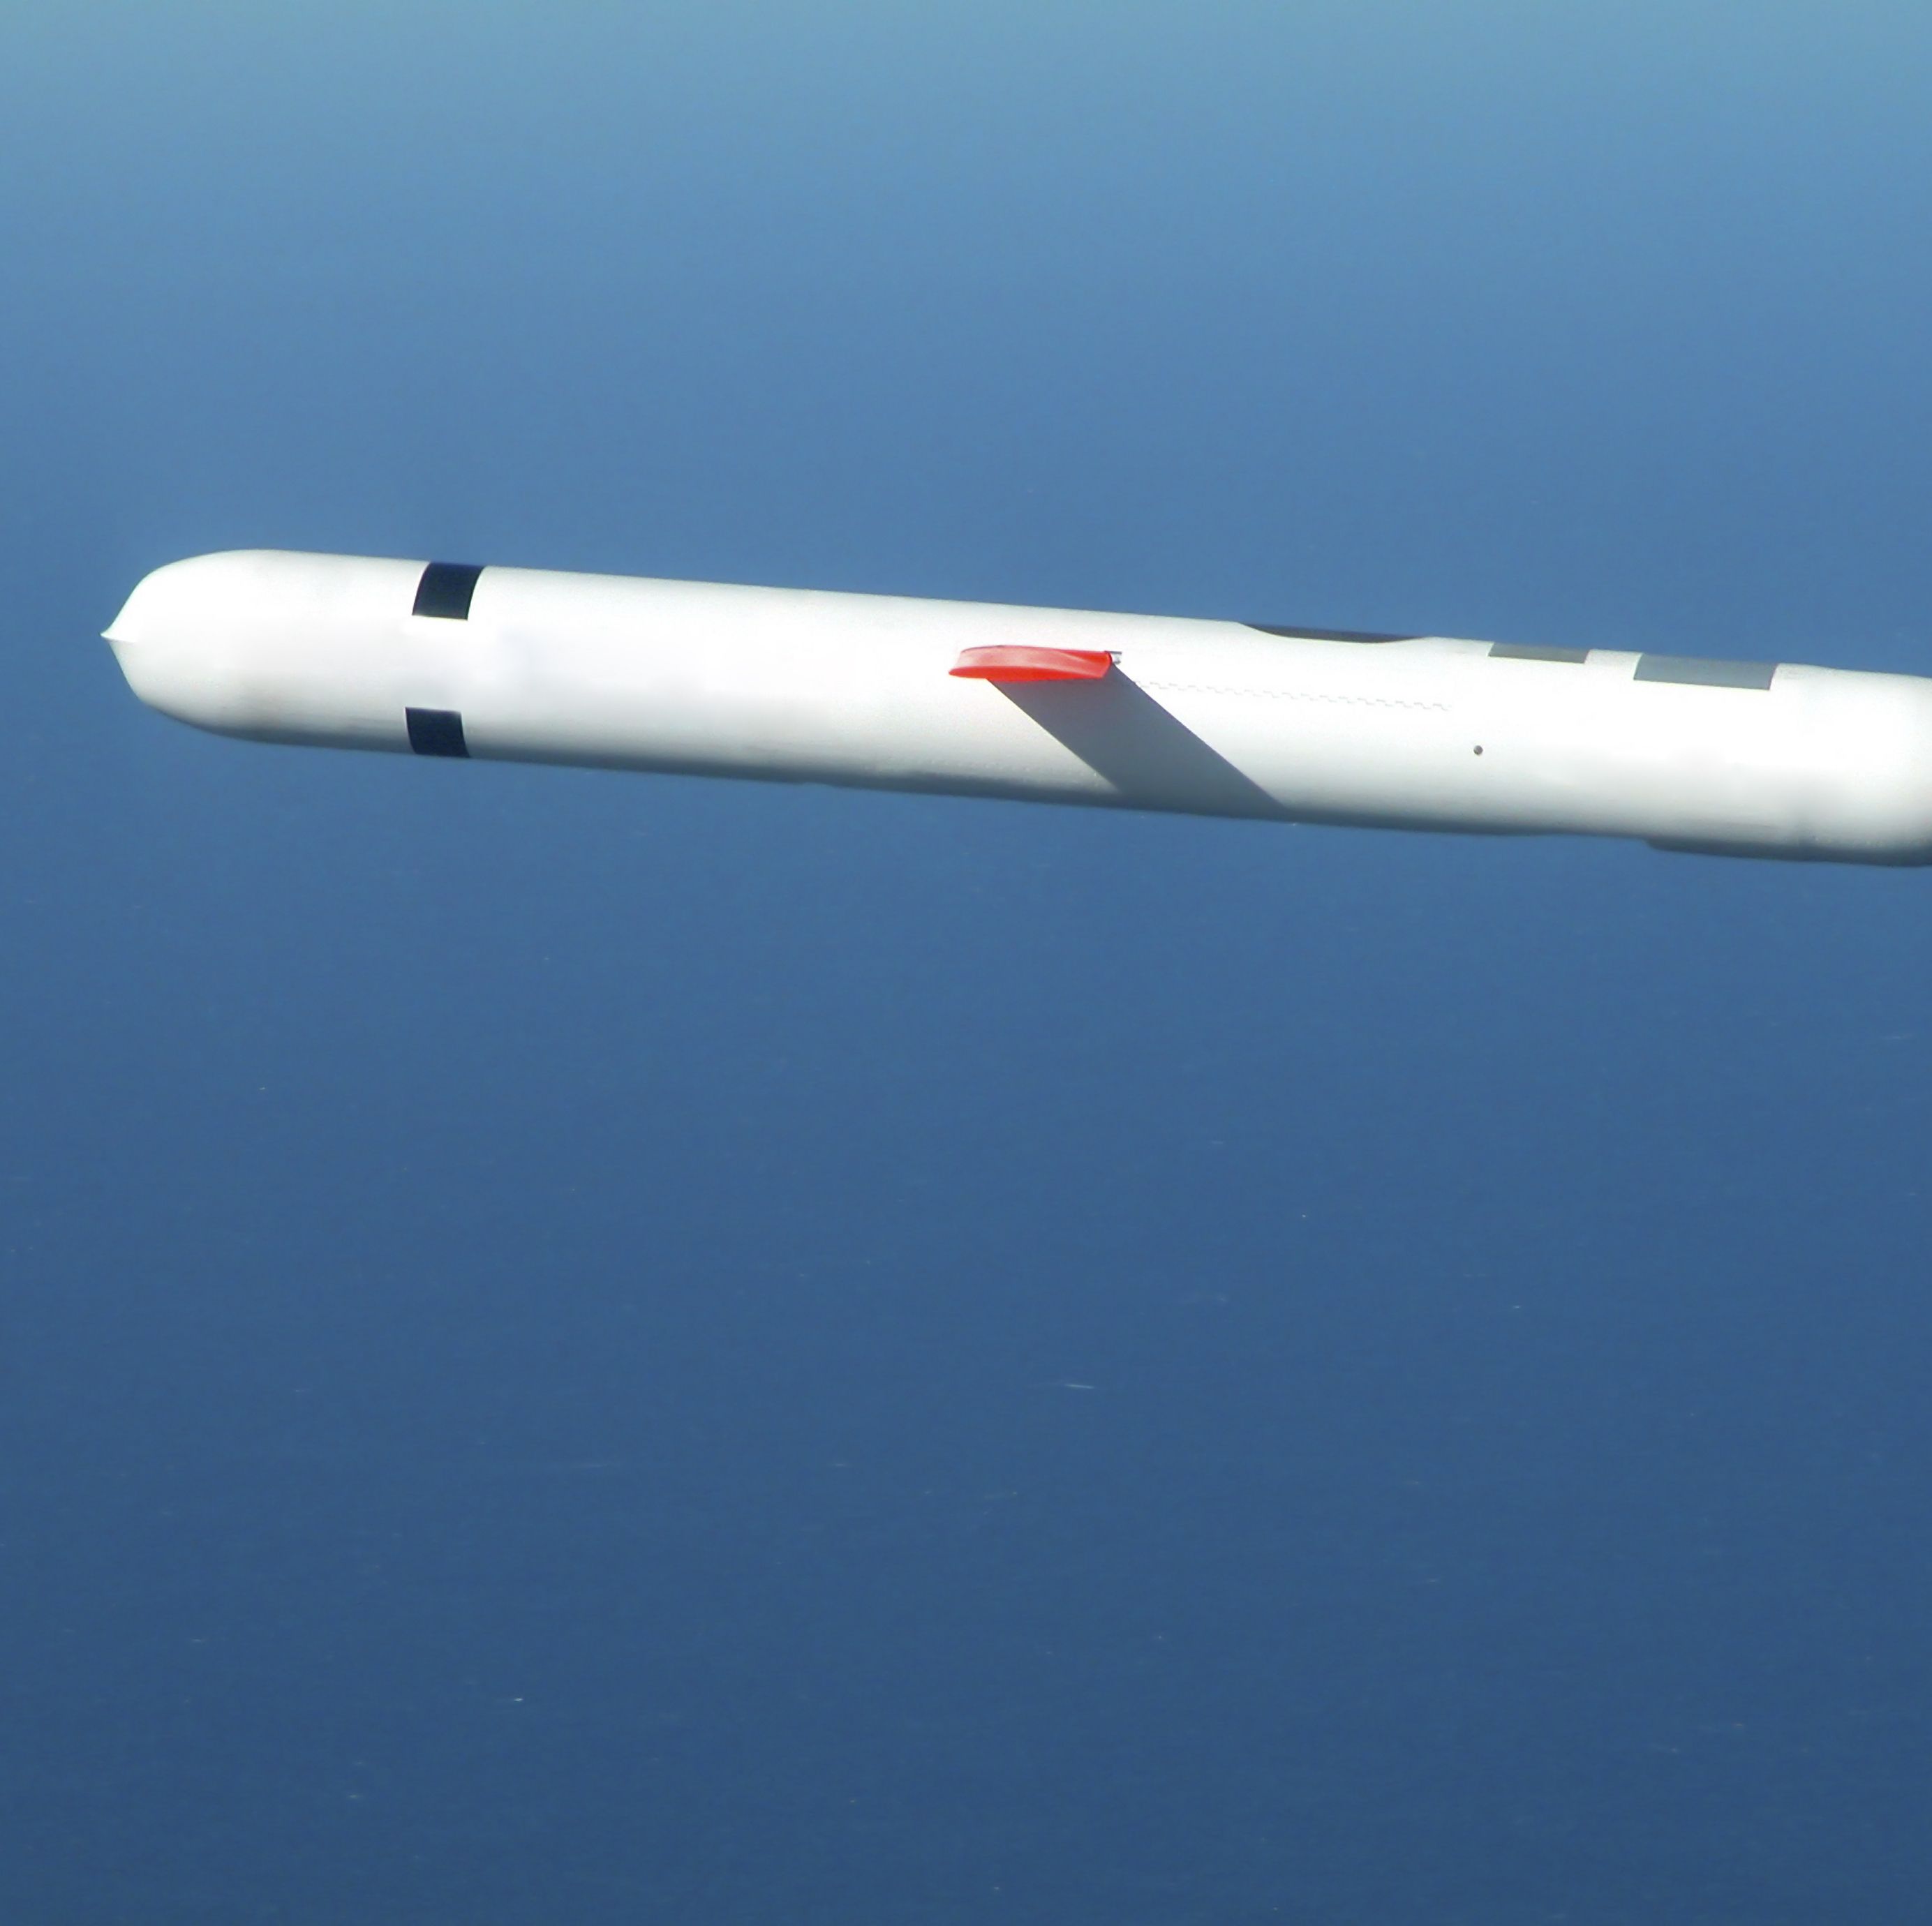 Cruise Missiles Are One of the Most Powerful Weapons Today—Because They Work Like Drones